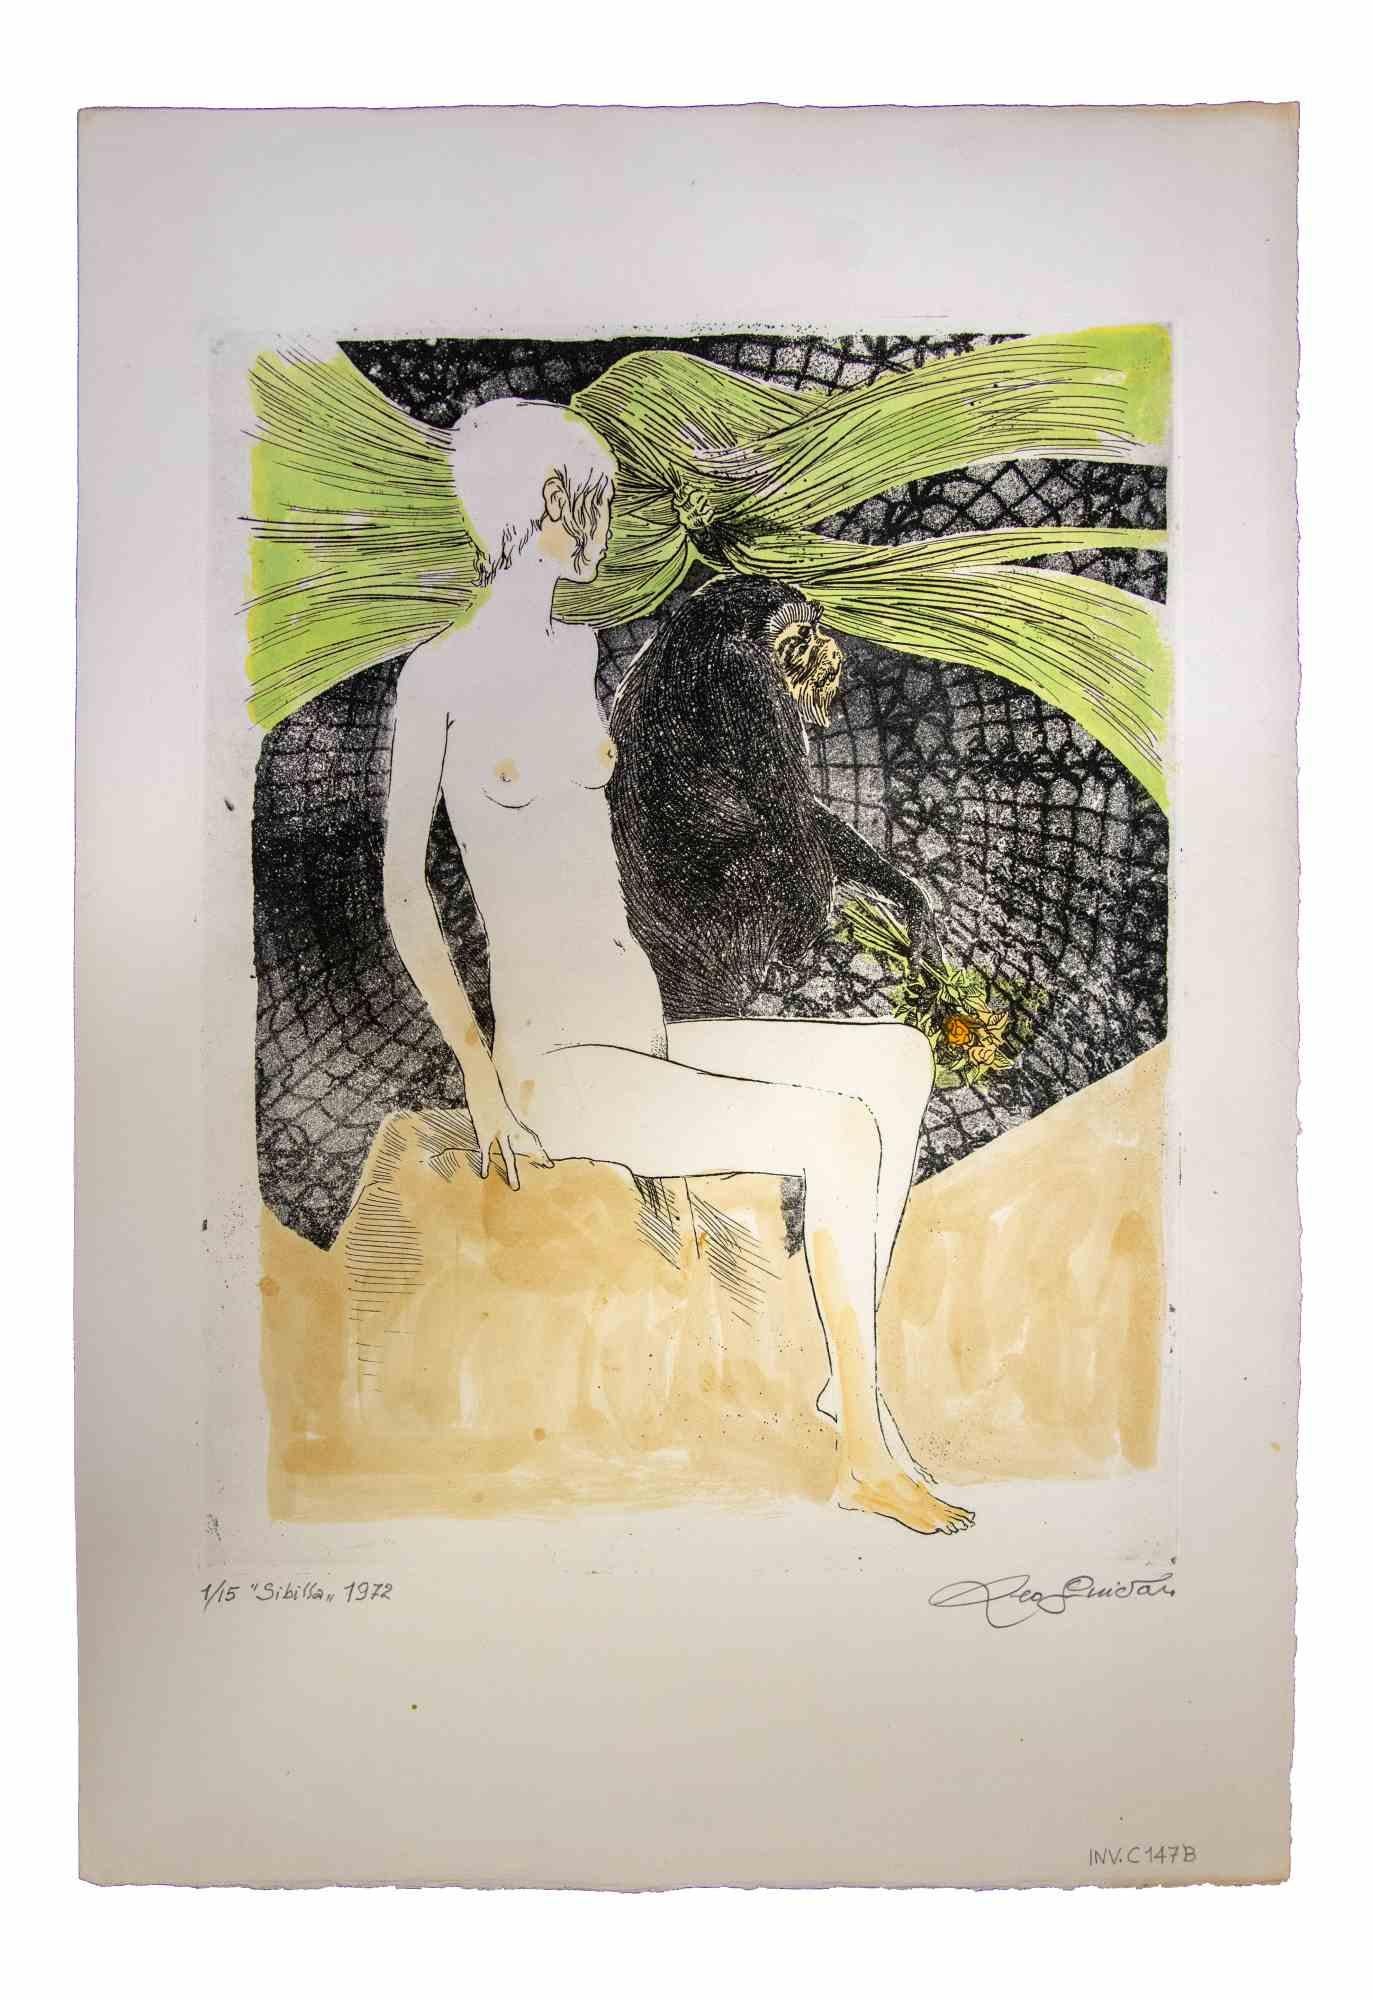 Sybil is an original etching and aquatint realized by Leo Guida in 1972.

Good condition.

Mounted on a white cardboard passpartout (50x34 cm).

Edition 1/5.

Hand-signed.

Leo Guida  (1992 - 2017). Sensitive to current issues, artistic movements